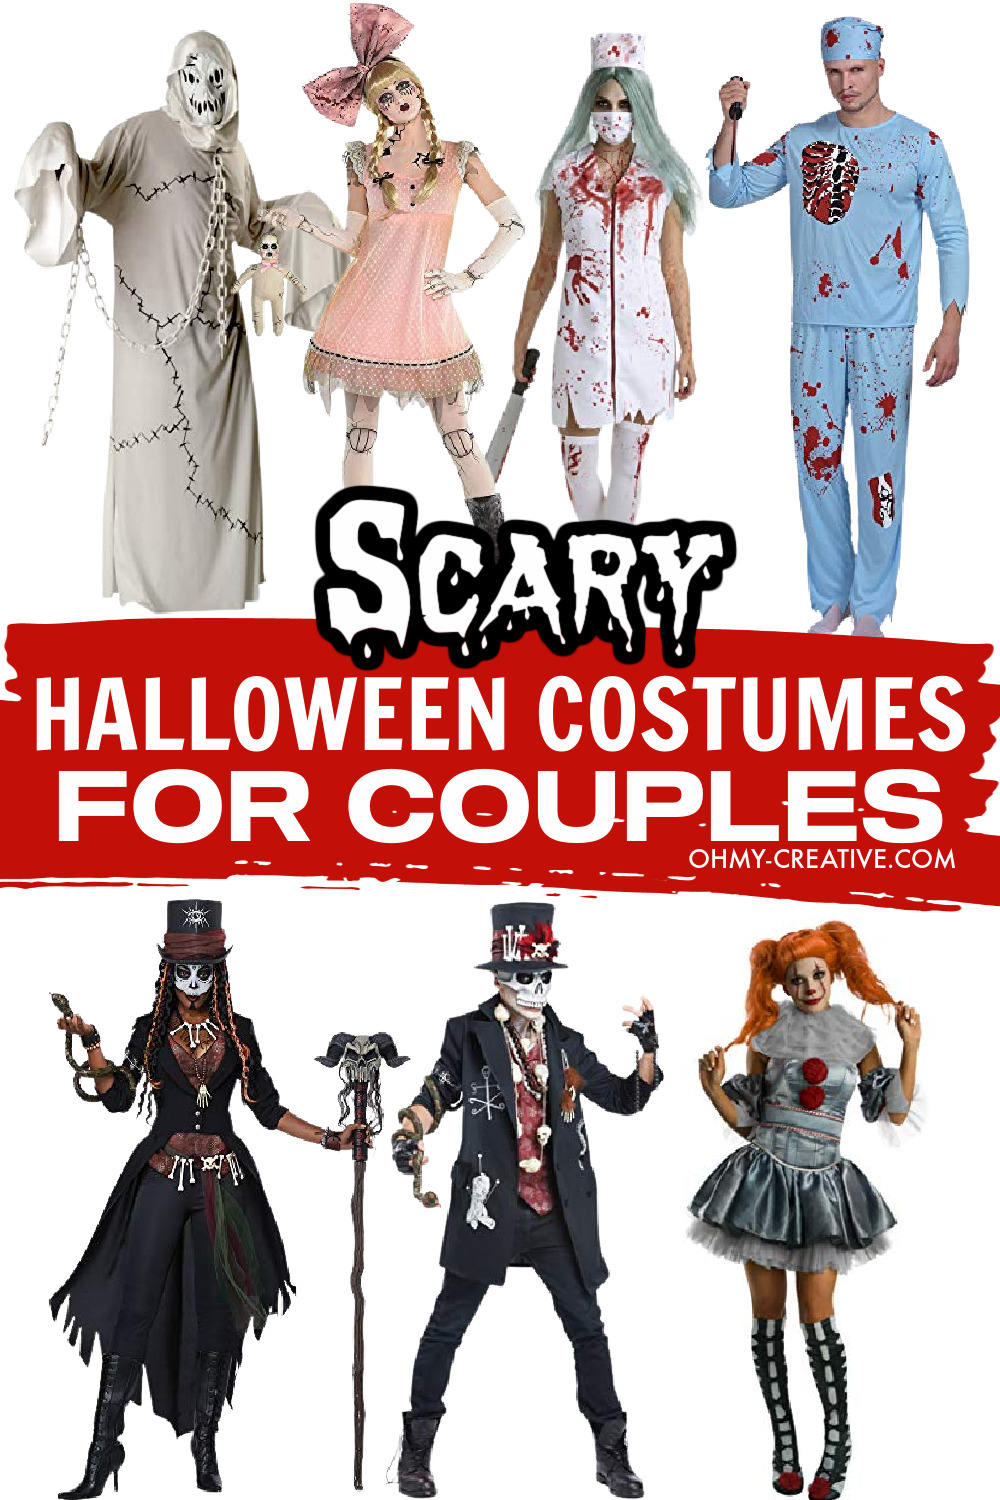 A collage of scary Halloween costumes for couples.